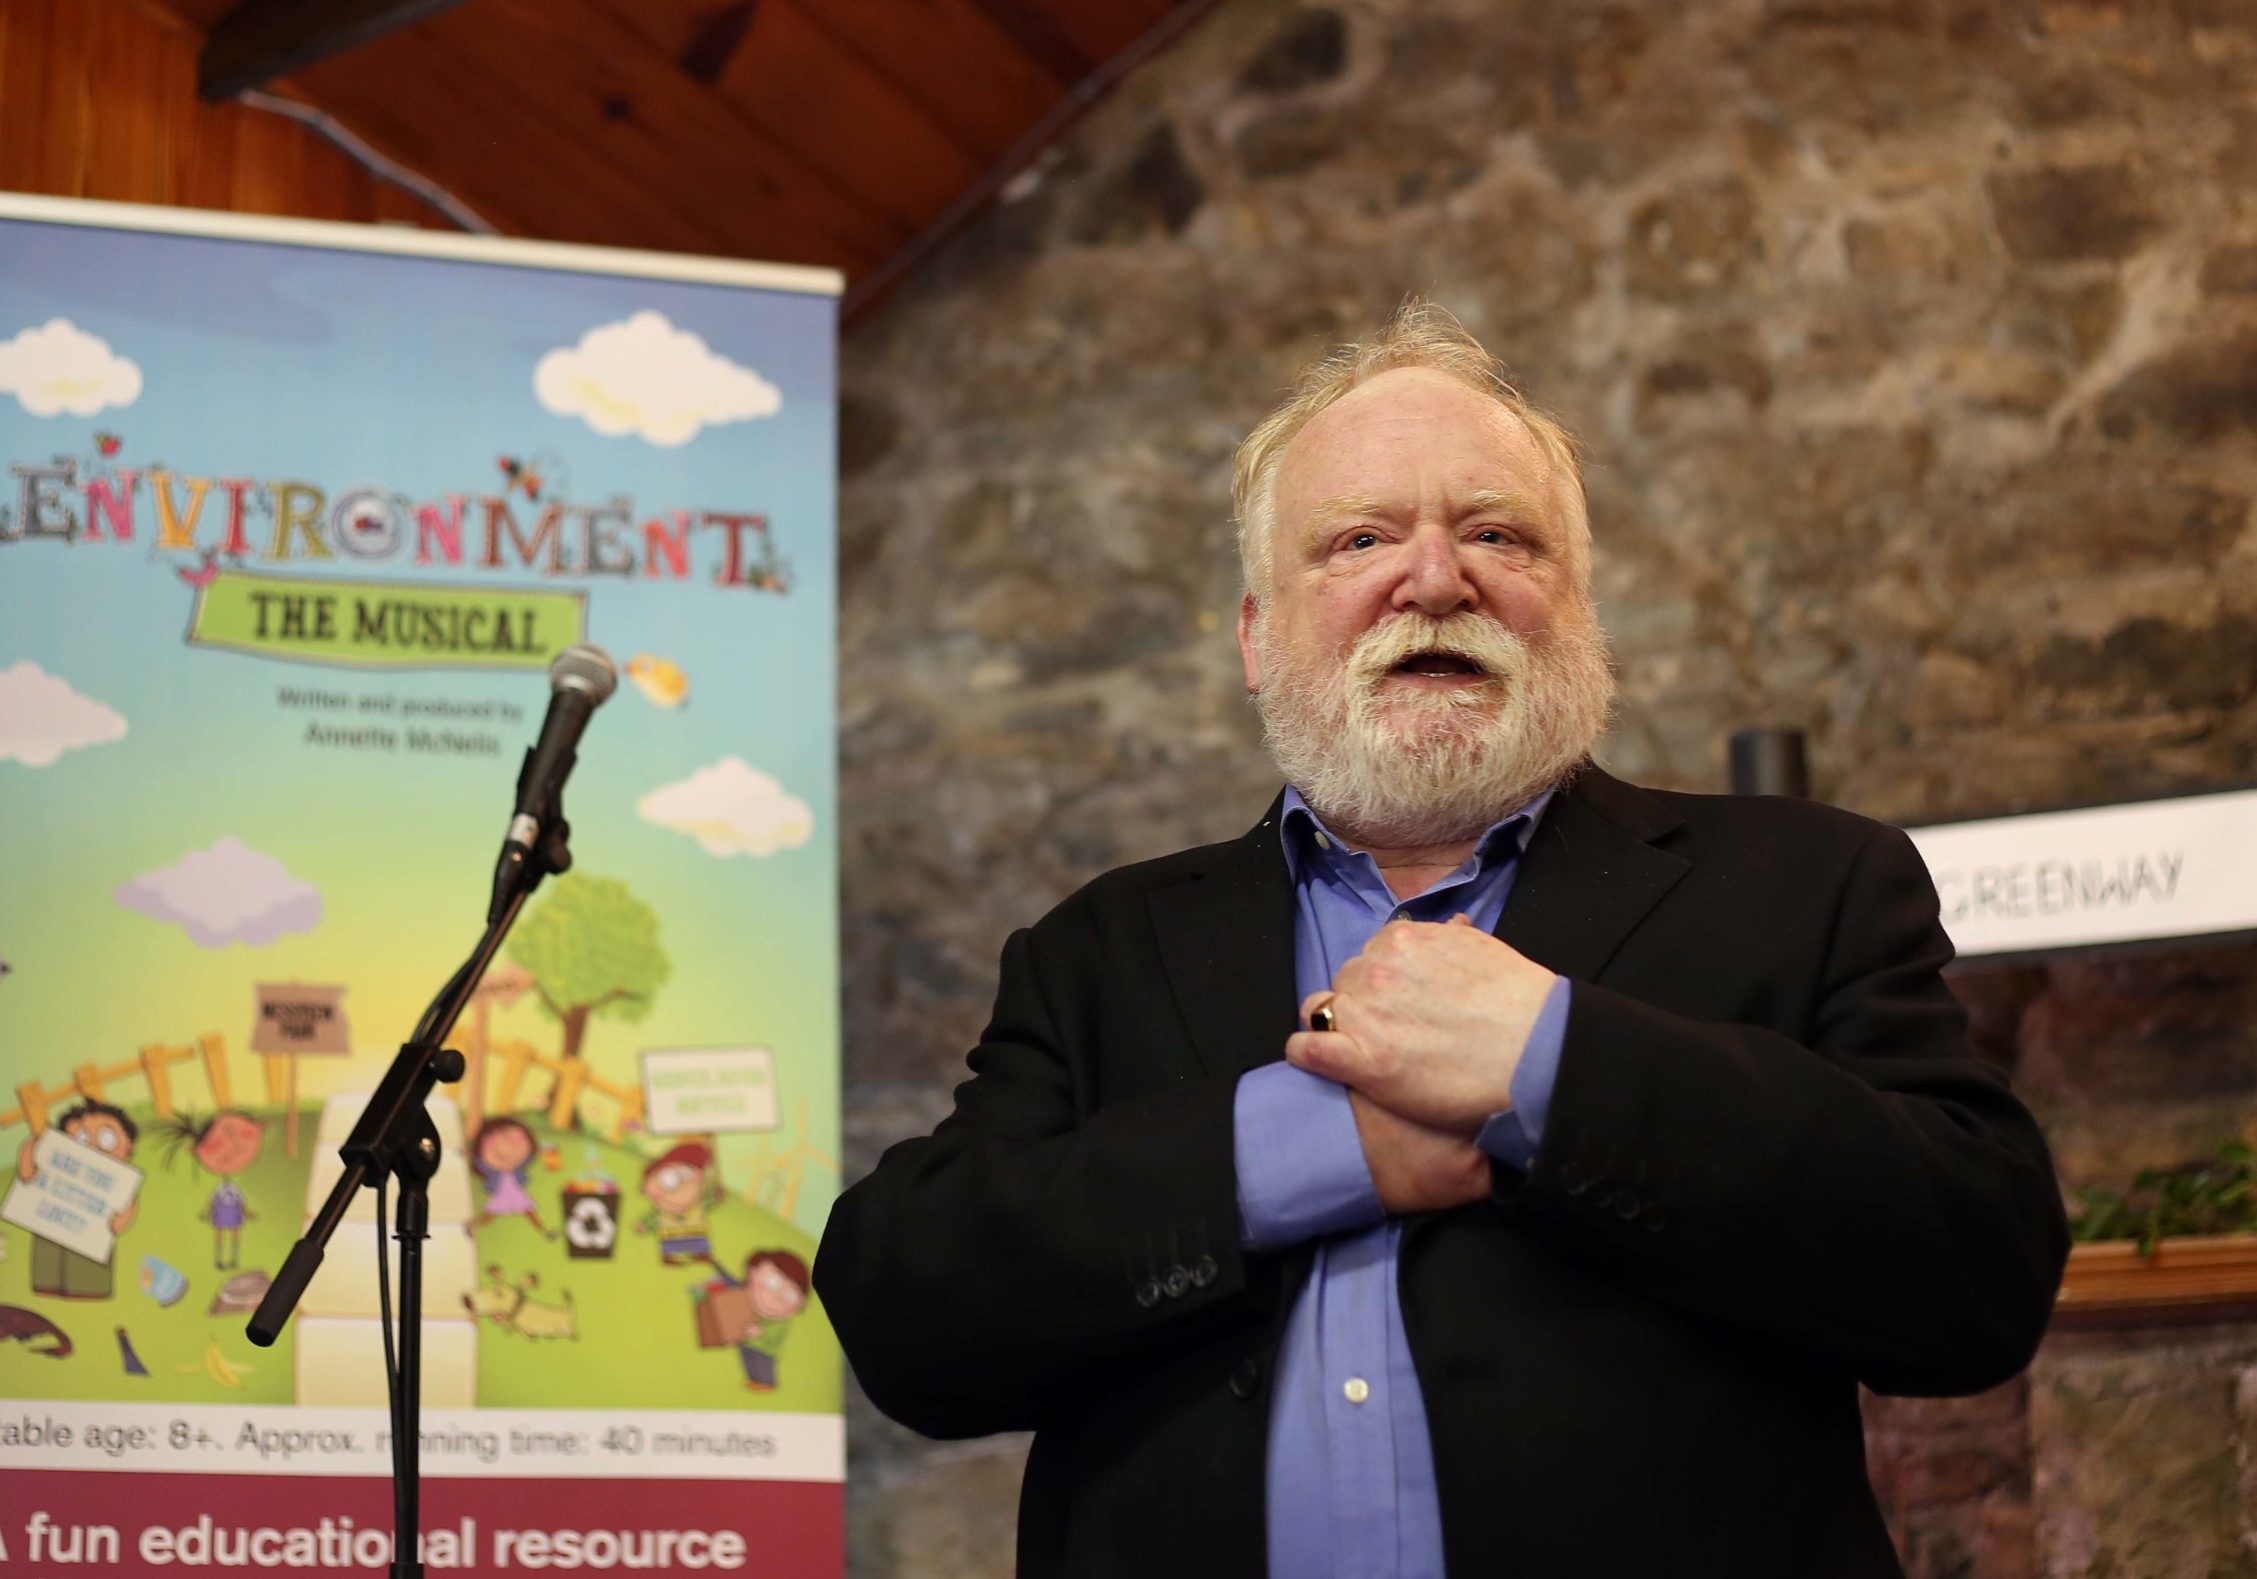 Playwright and poet, Frank McGuinness launches "Environment the Musical"